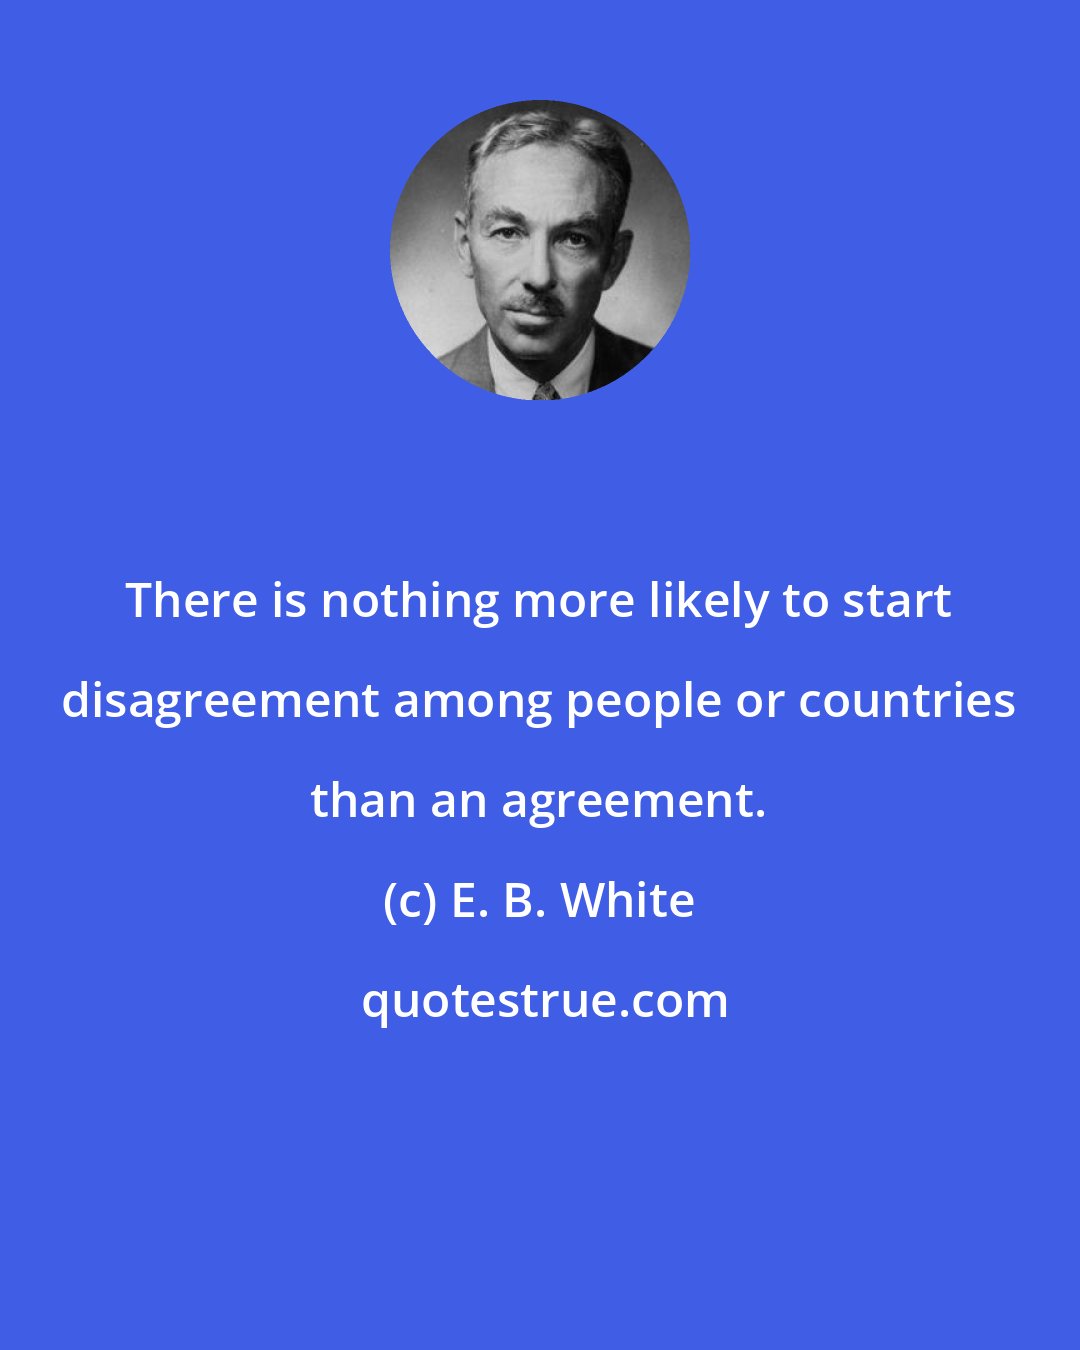 E. B. White: There is nothing more likely to start disagreement among people or countries than an agreement.